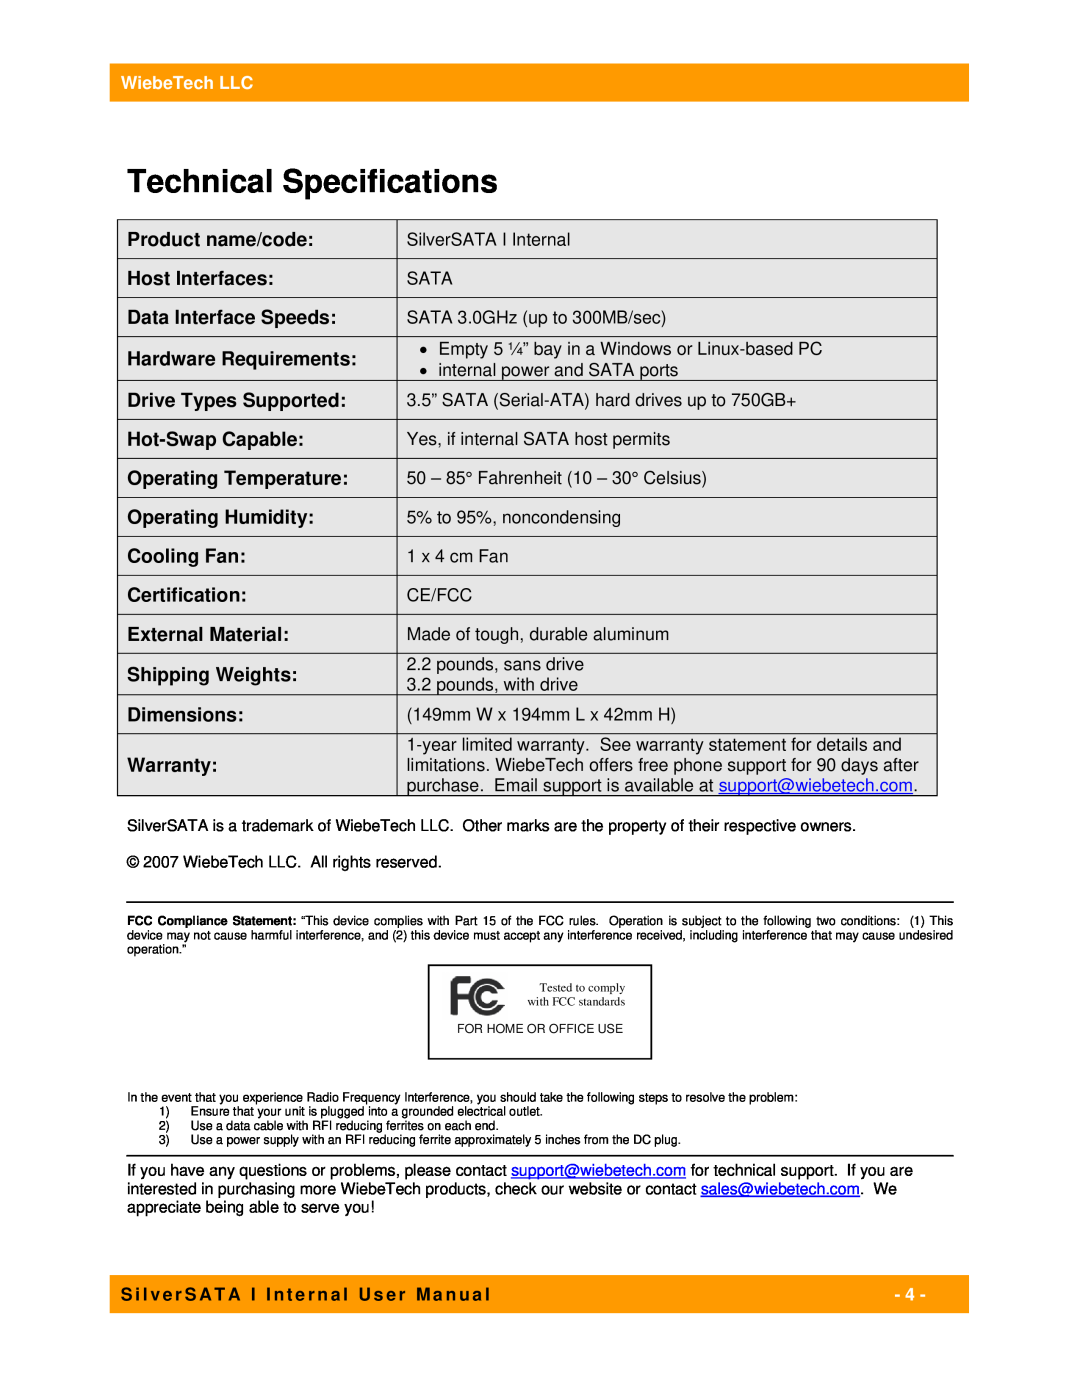 WiebeTech I user manual Technical Specifications 